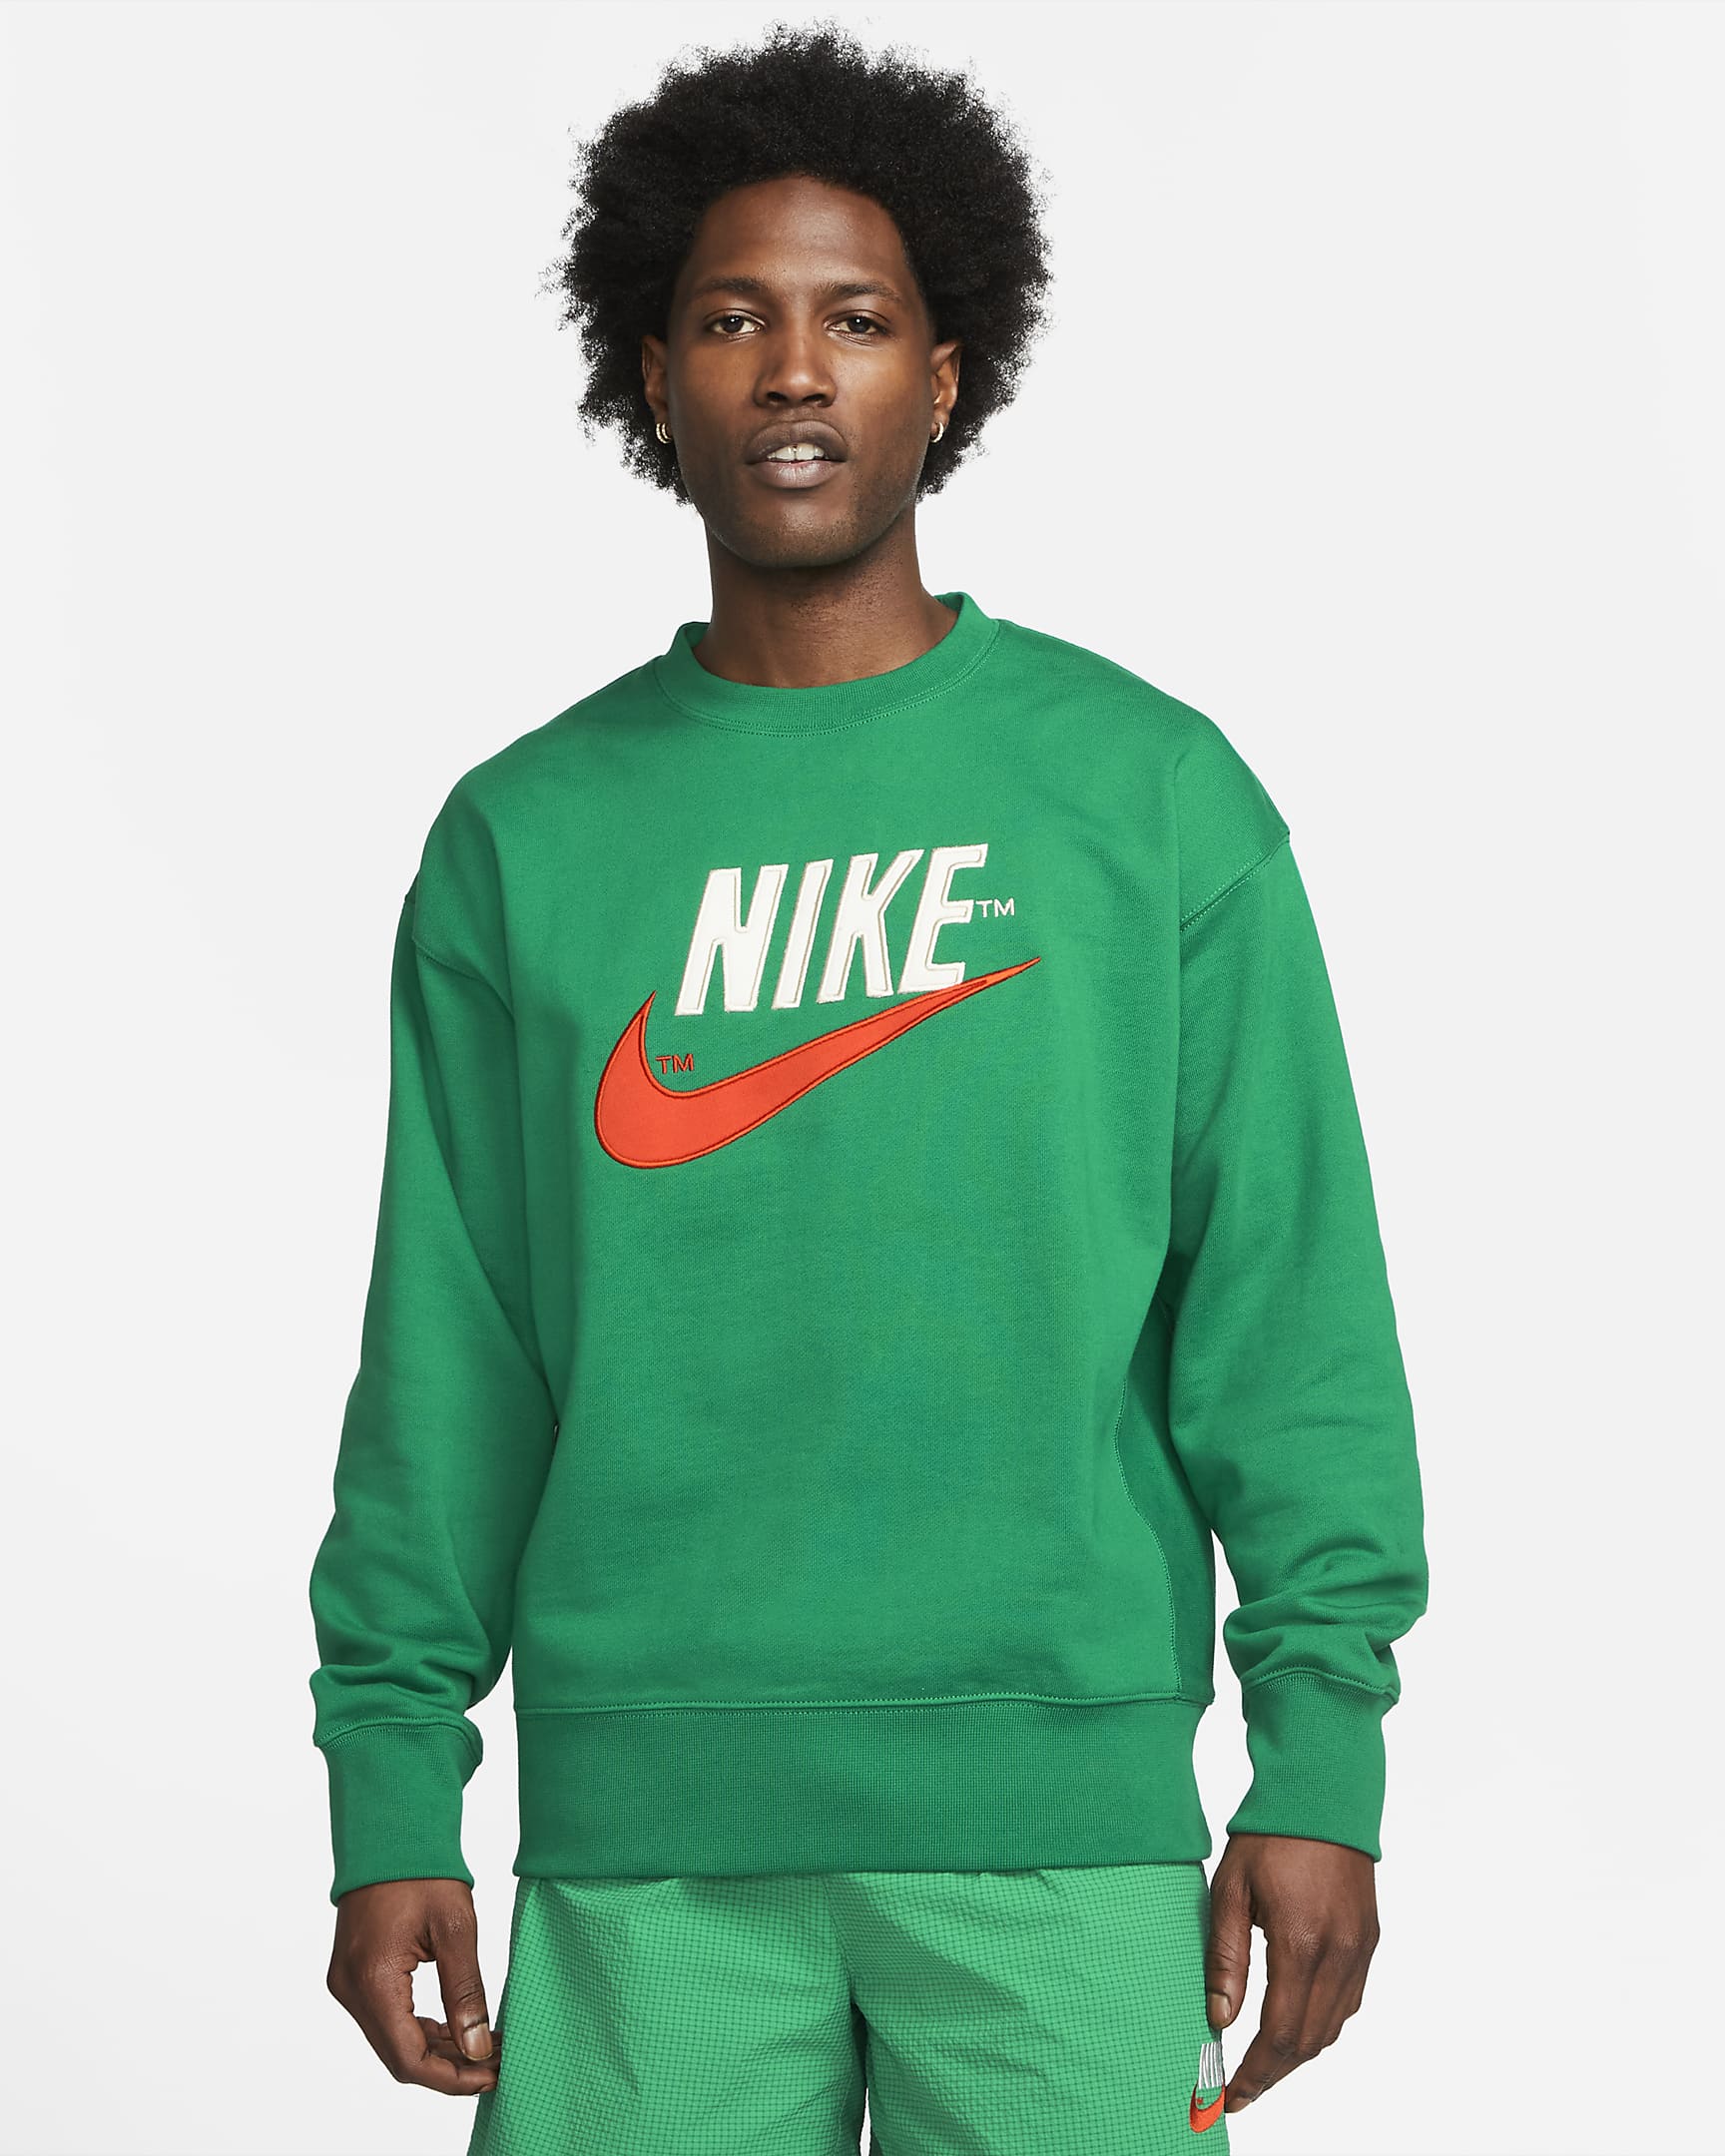 sportswear-mens-french-terry-crew-pV4hLD.png